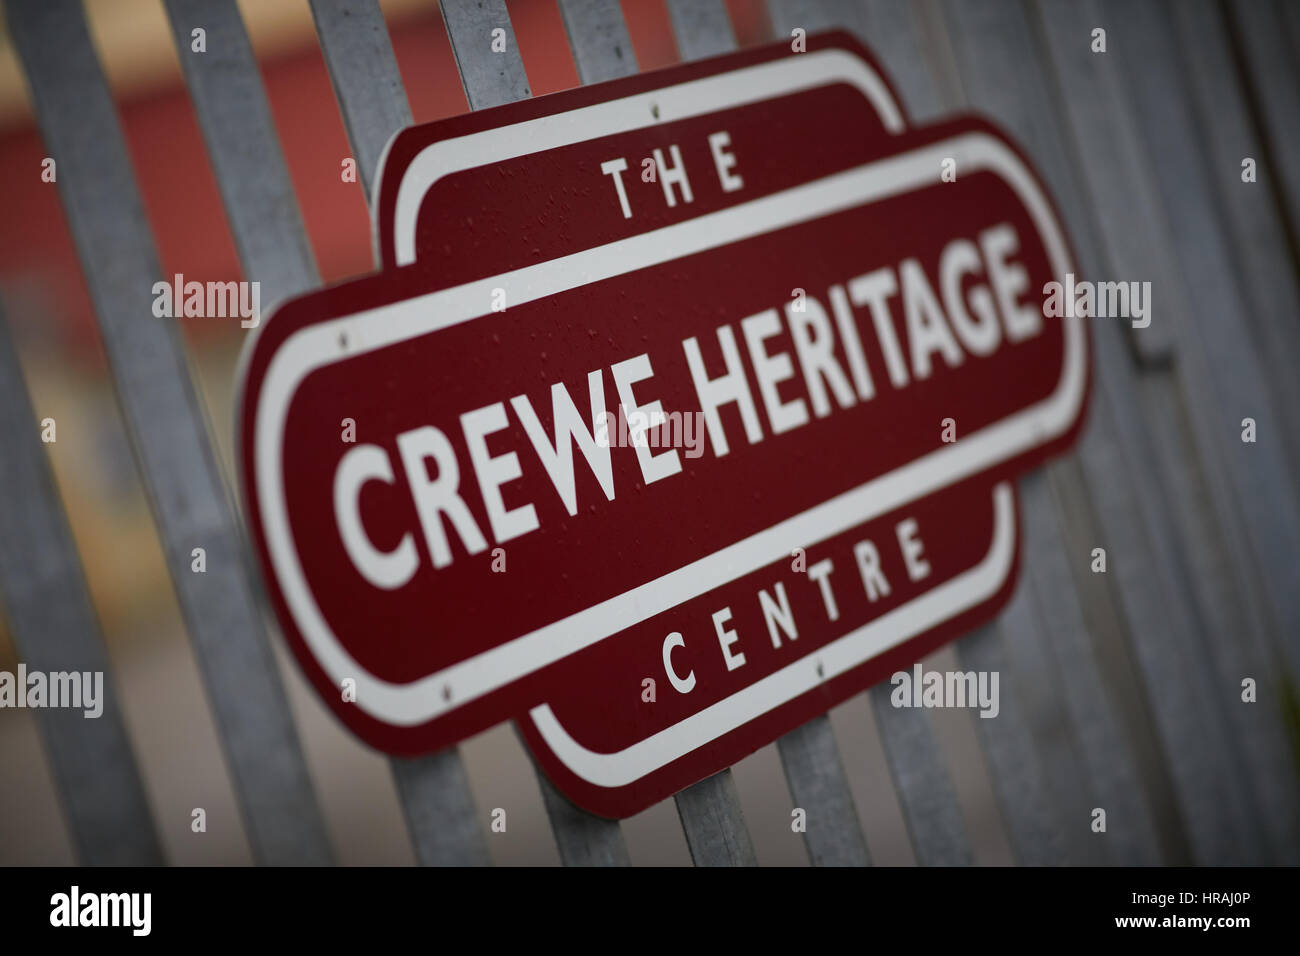 Sign for The Crewe Heritage Centre, Cheshire East, England, UK. Stock Photo